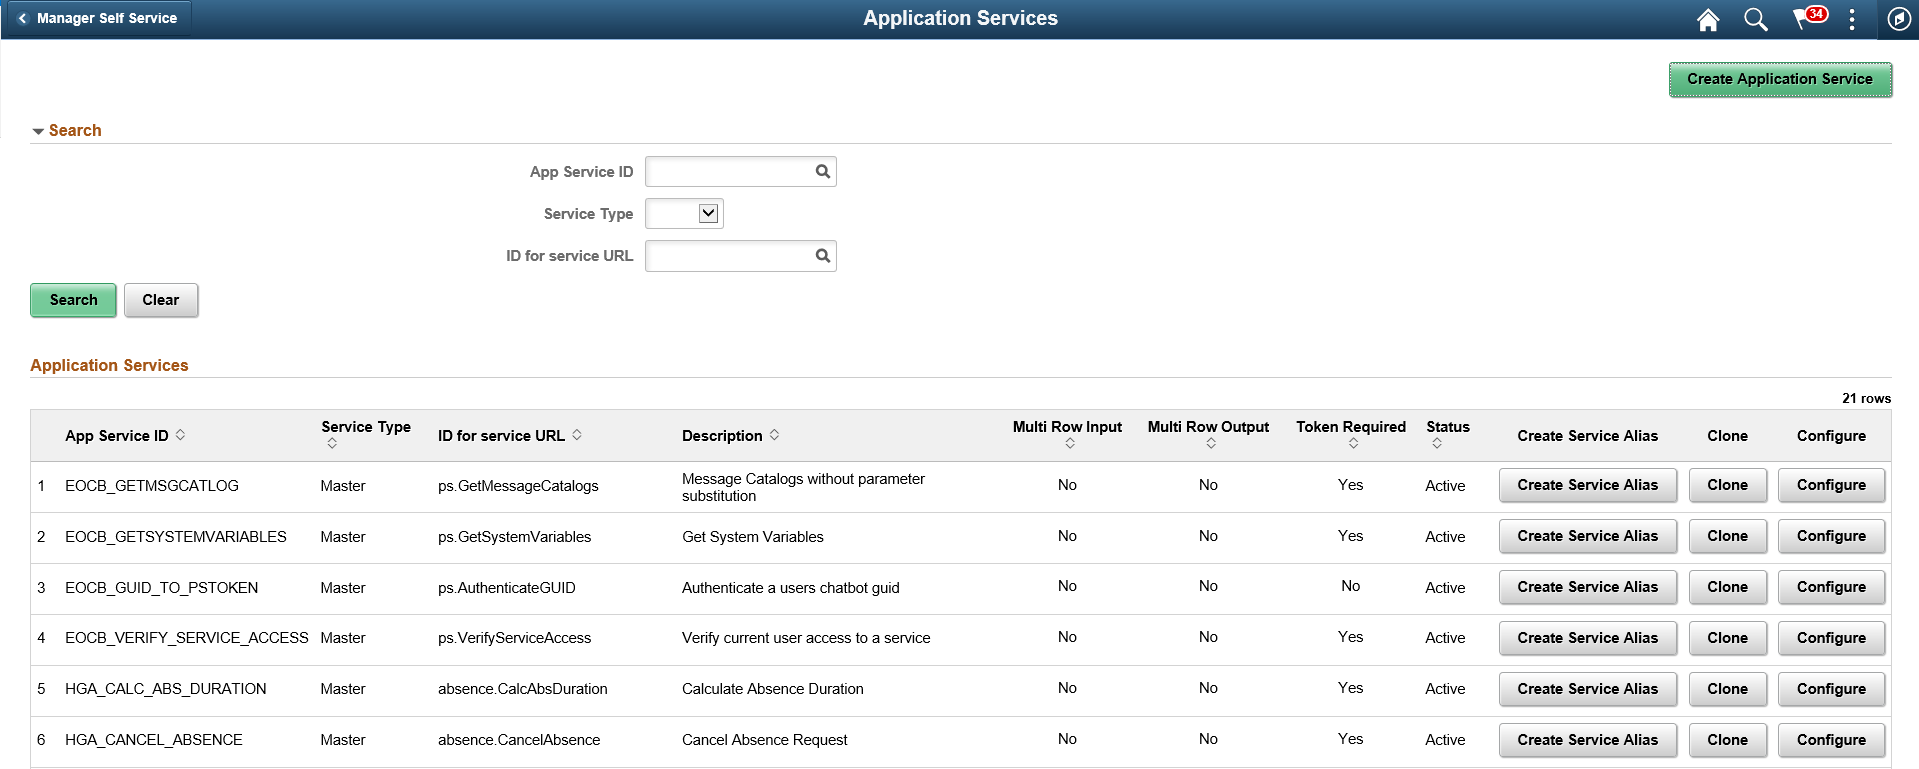 Application Services page